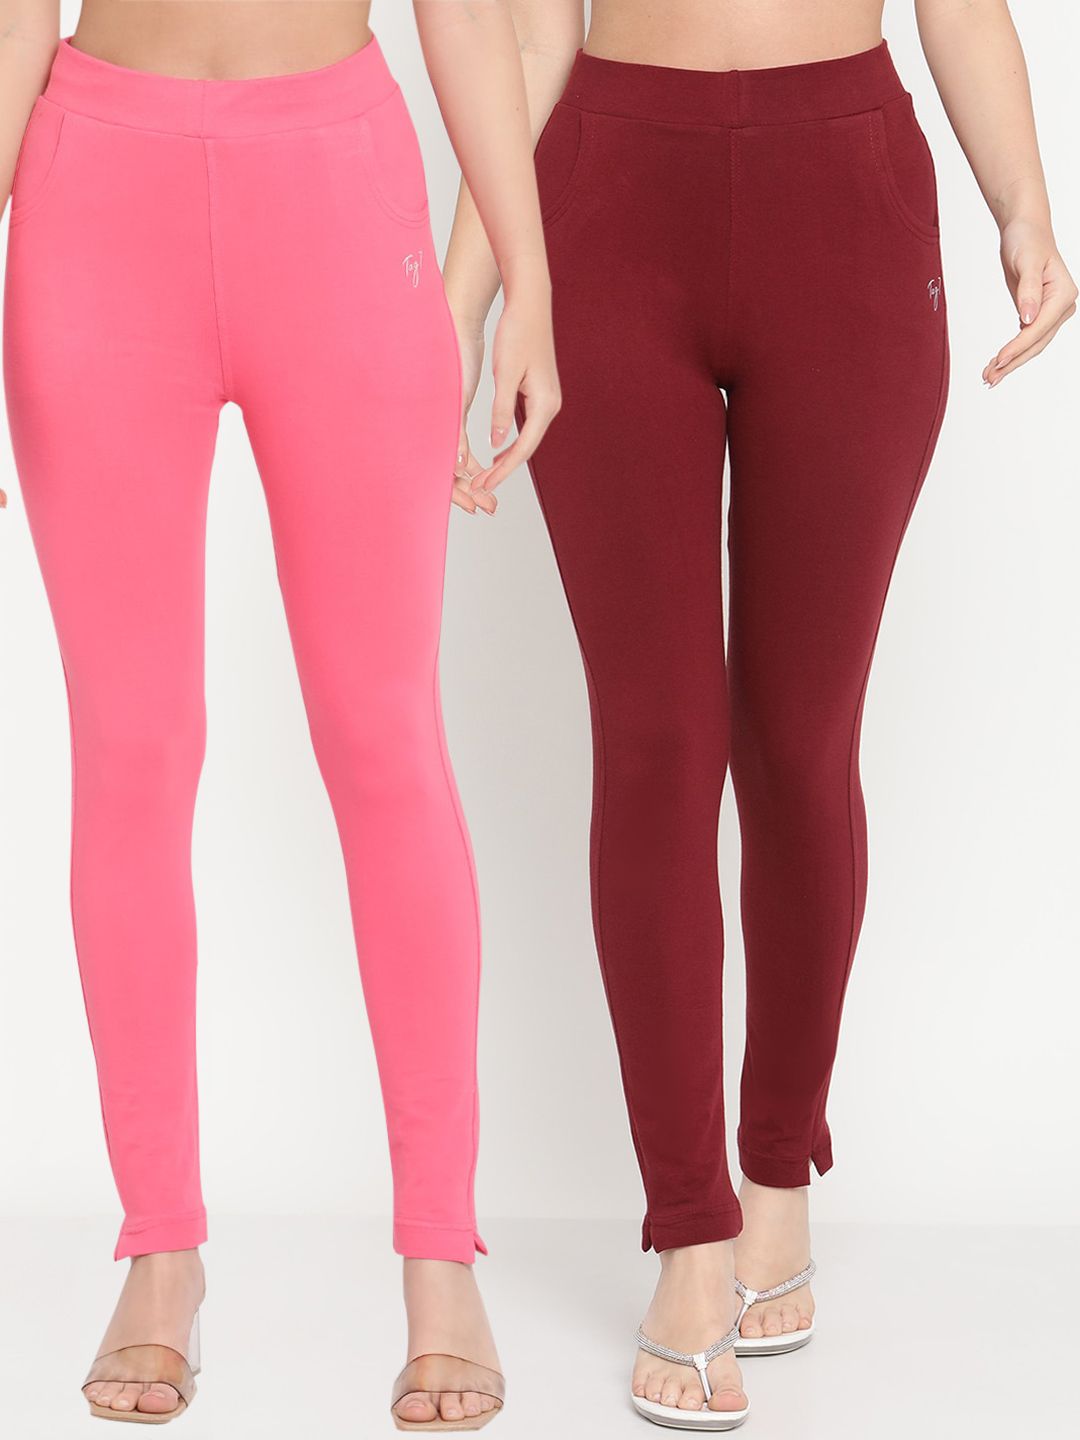 TAG 7 Women Maroon & Pink Set of 2 Solid Ankle Length Cotton Leggings Price in India